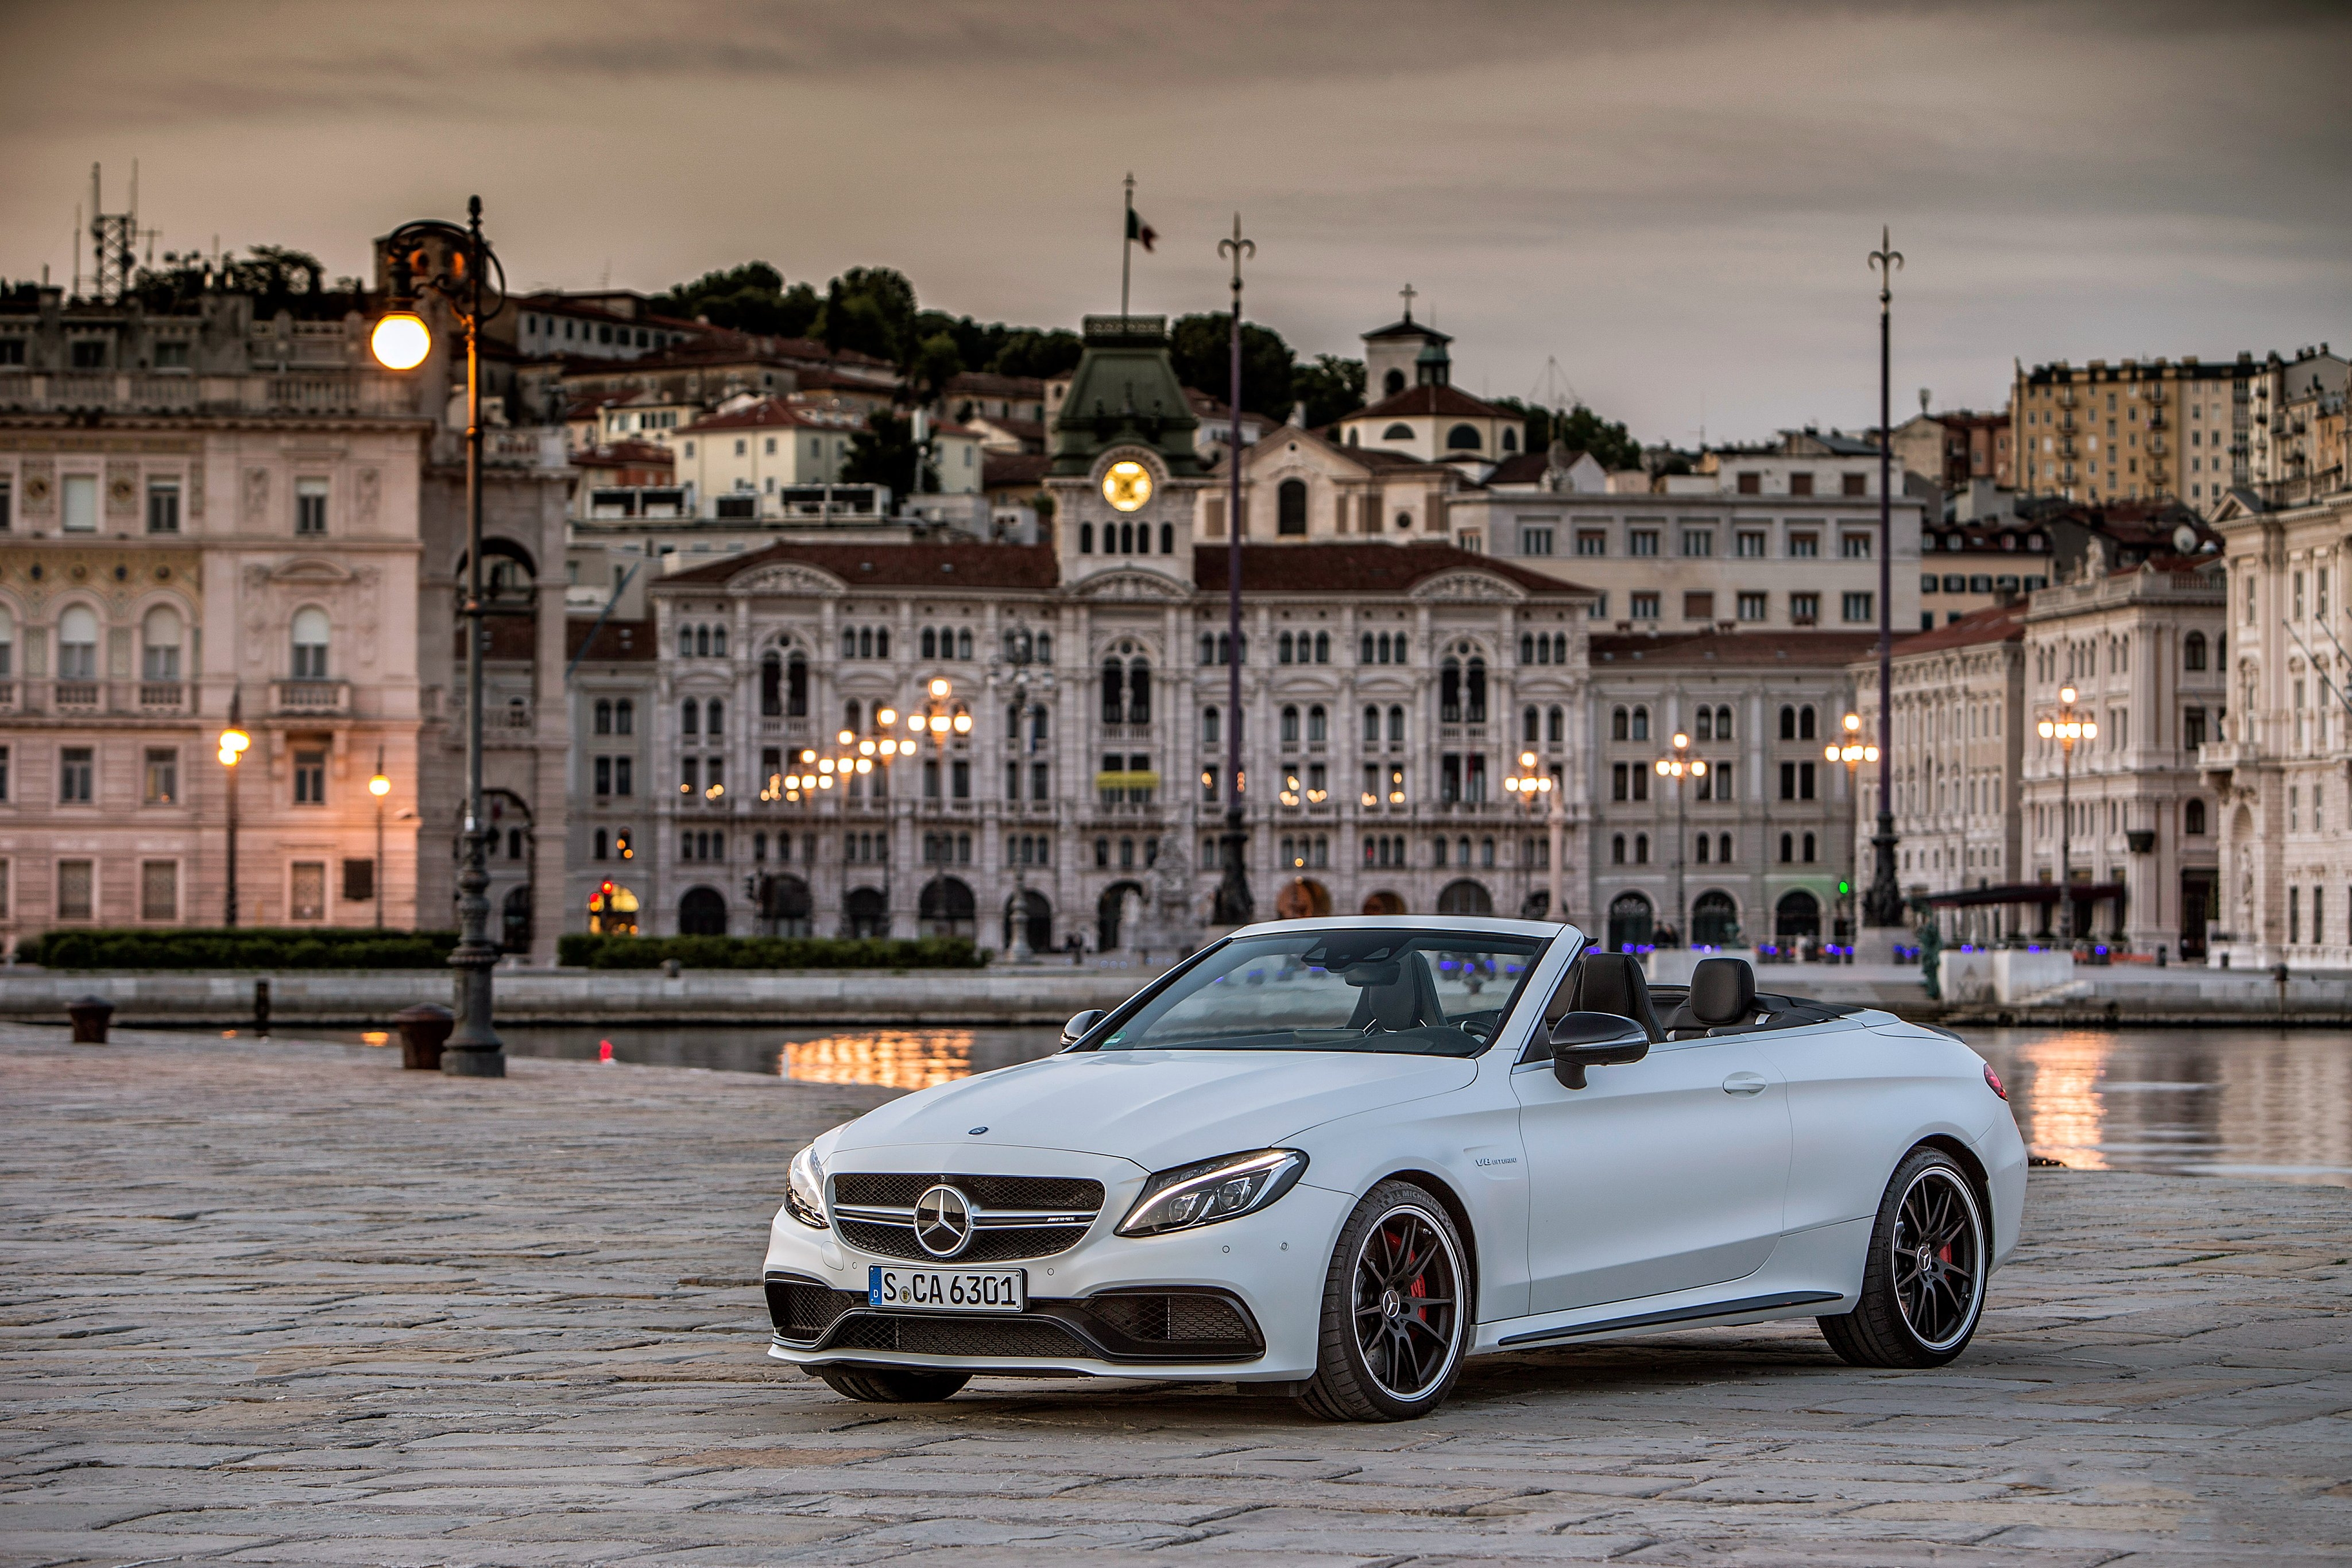 Wallpapers wallpaper mercedes amg c63s cabriolet cars side view on the desktop